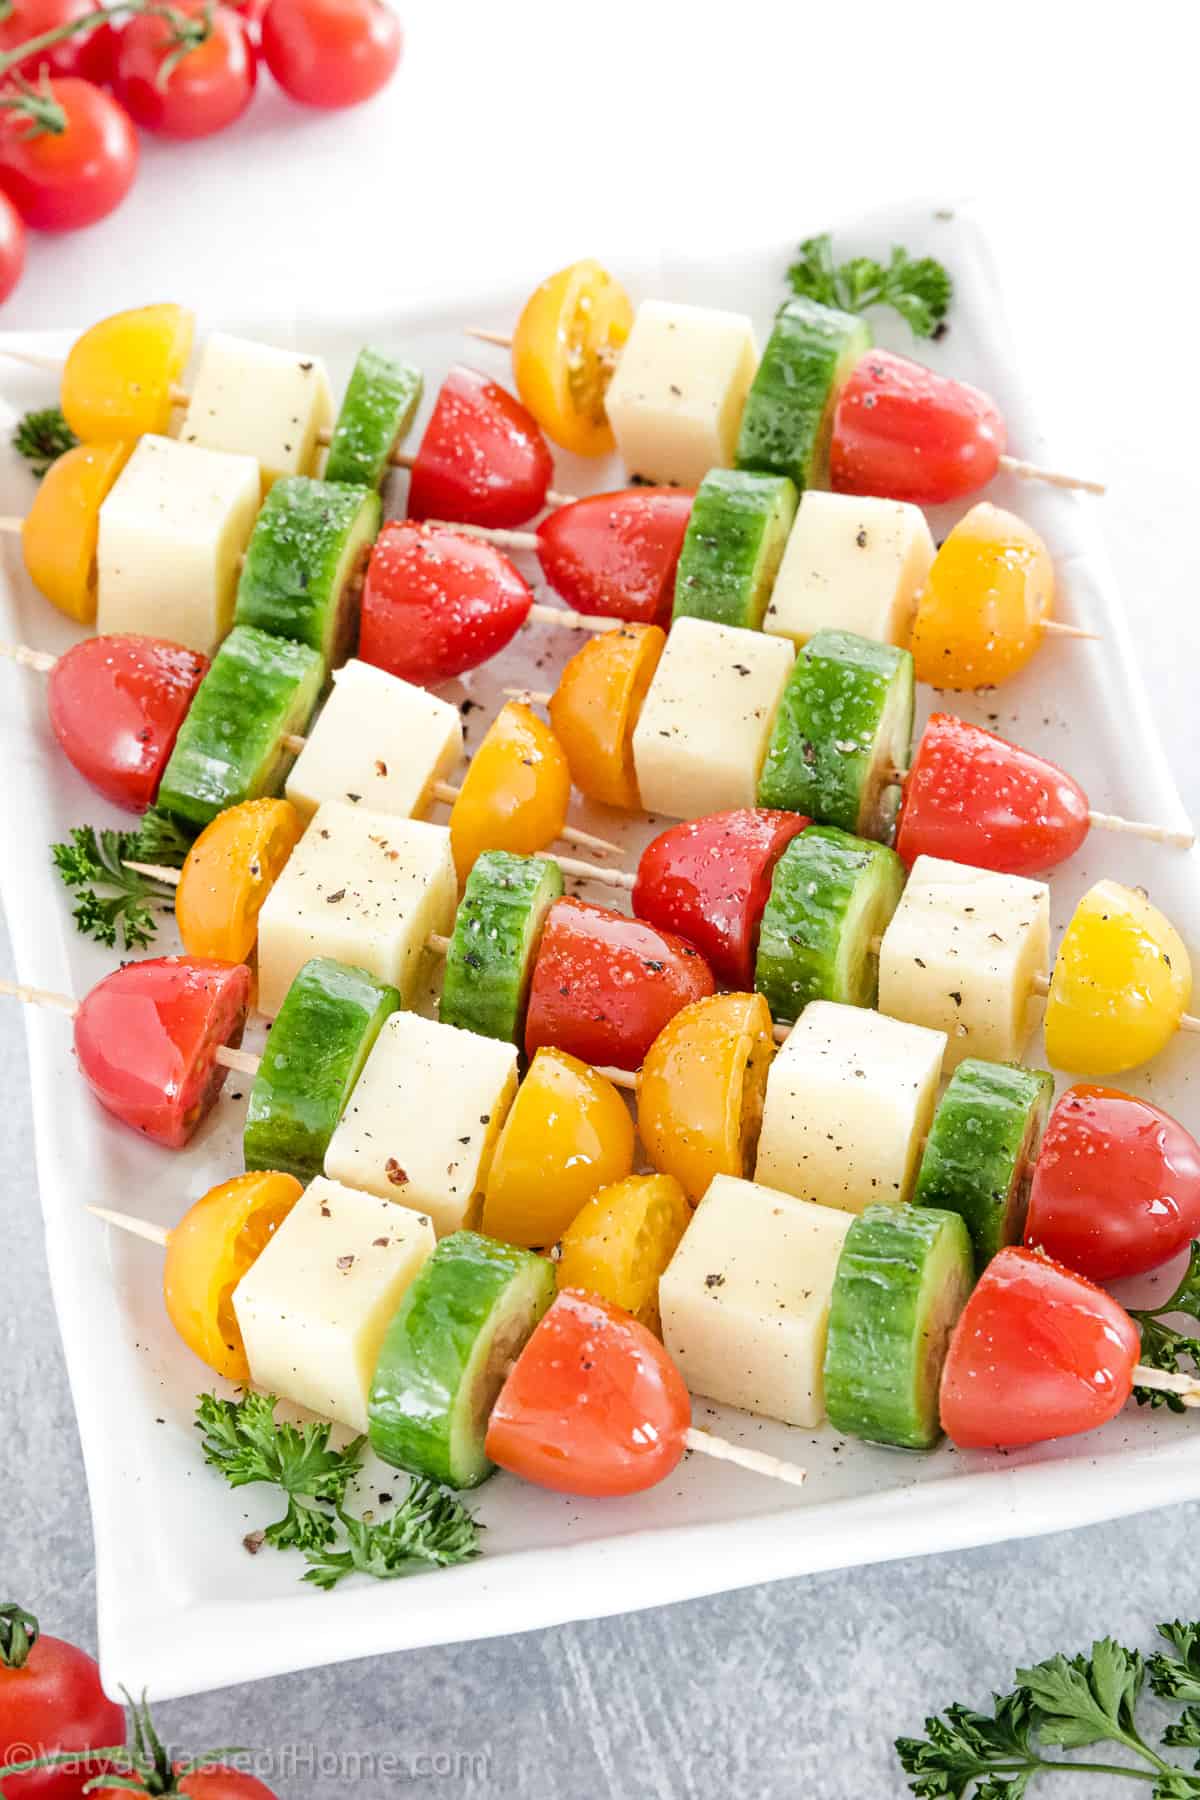 This tasty Mozzarella Appetizers recipe features fresh mozzarella, cherry tomatoes, cucumbers, and the perfect olive oil drizzle for a quick and easy recipe!